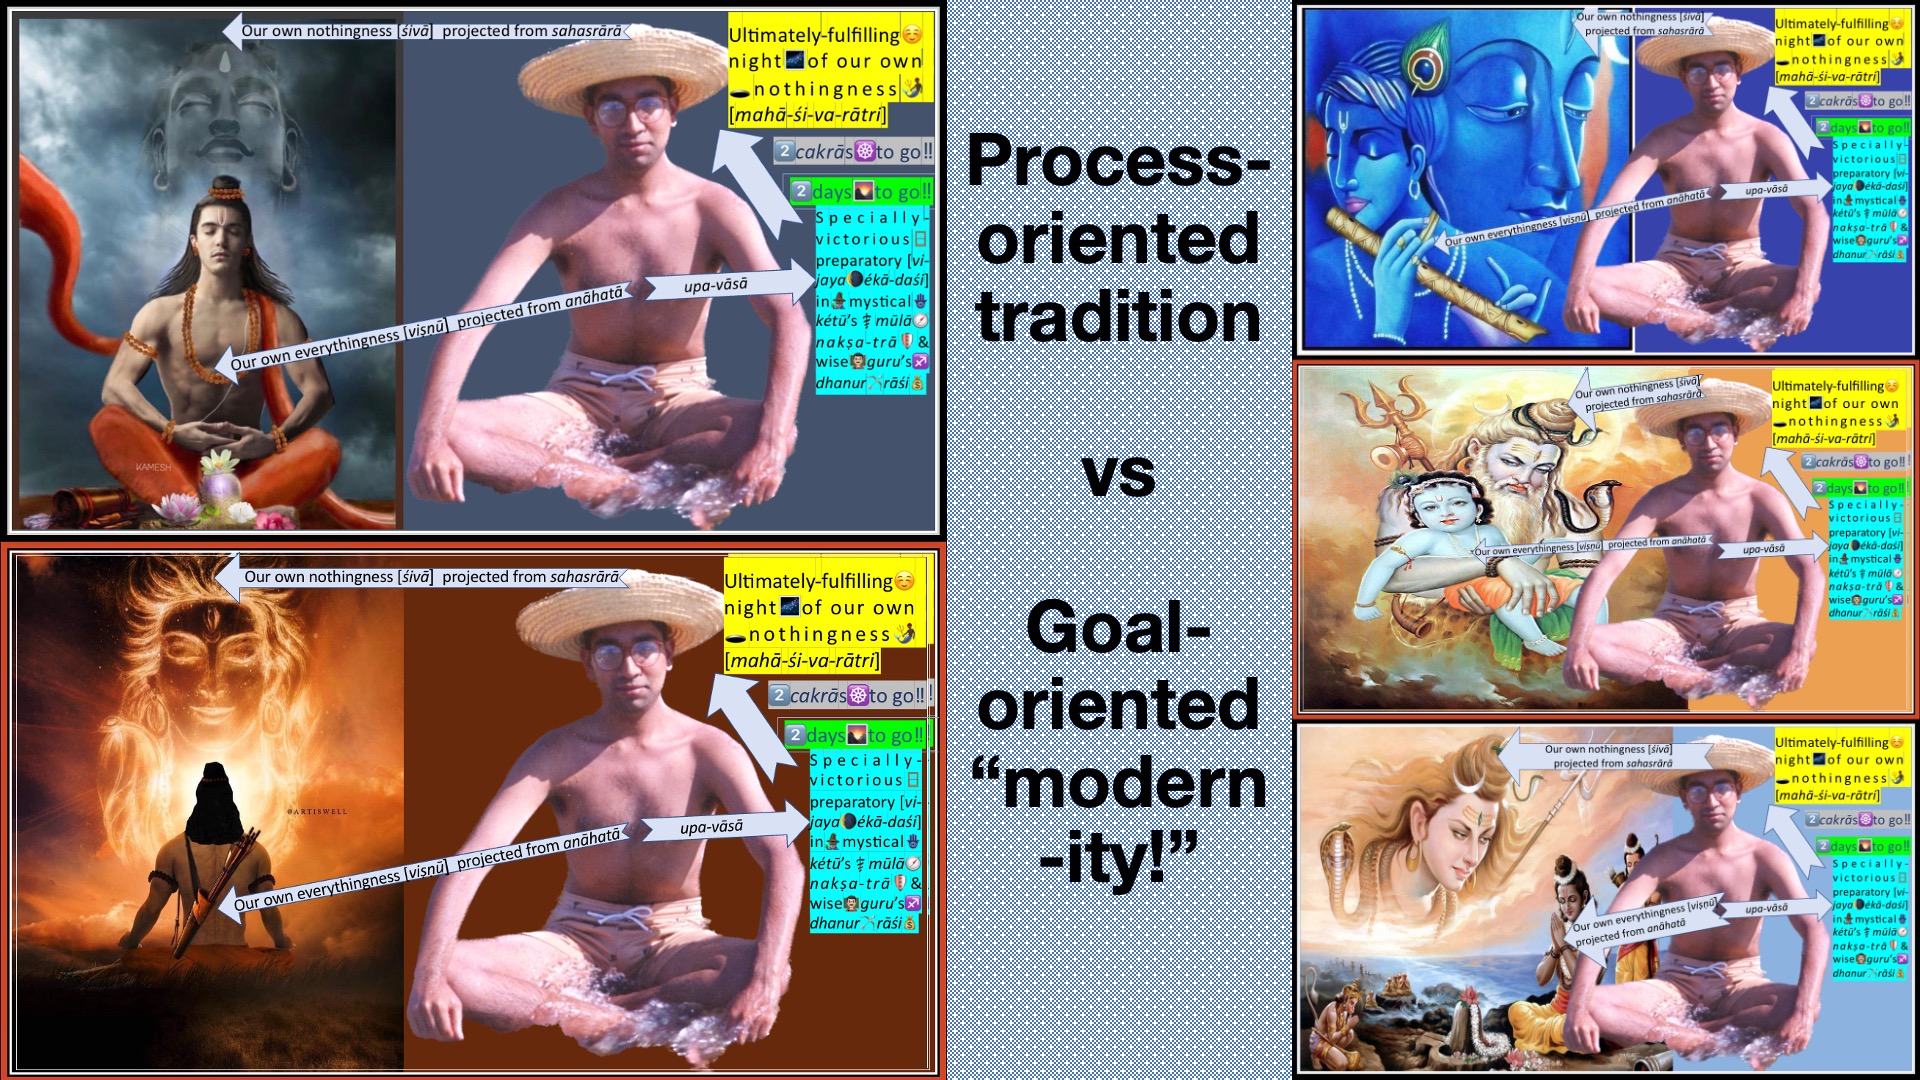 Process-oriented tradition vs goal-oriented “modernity!”